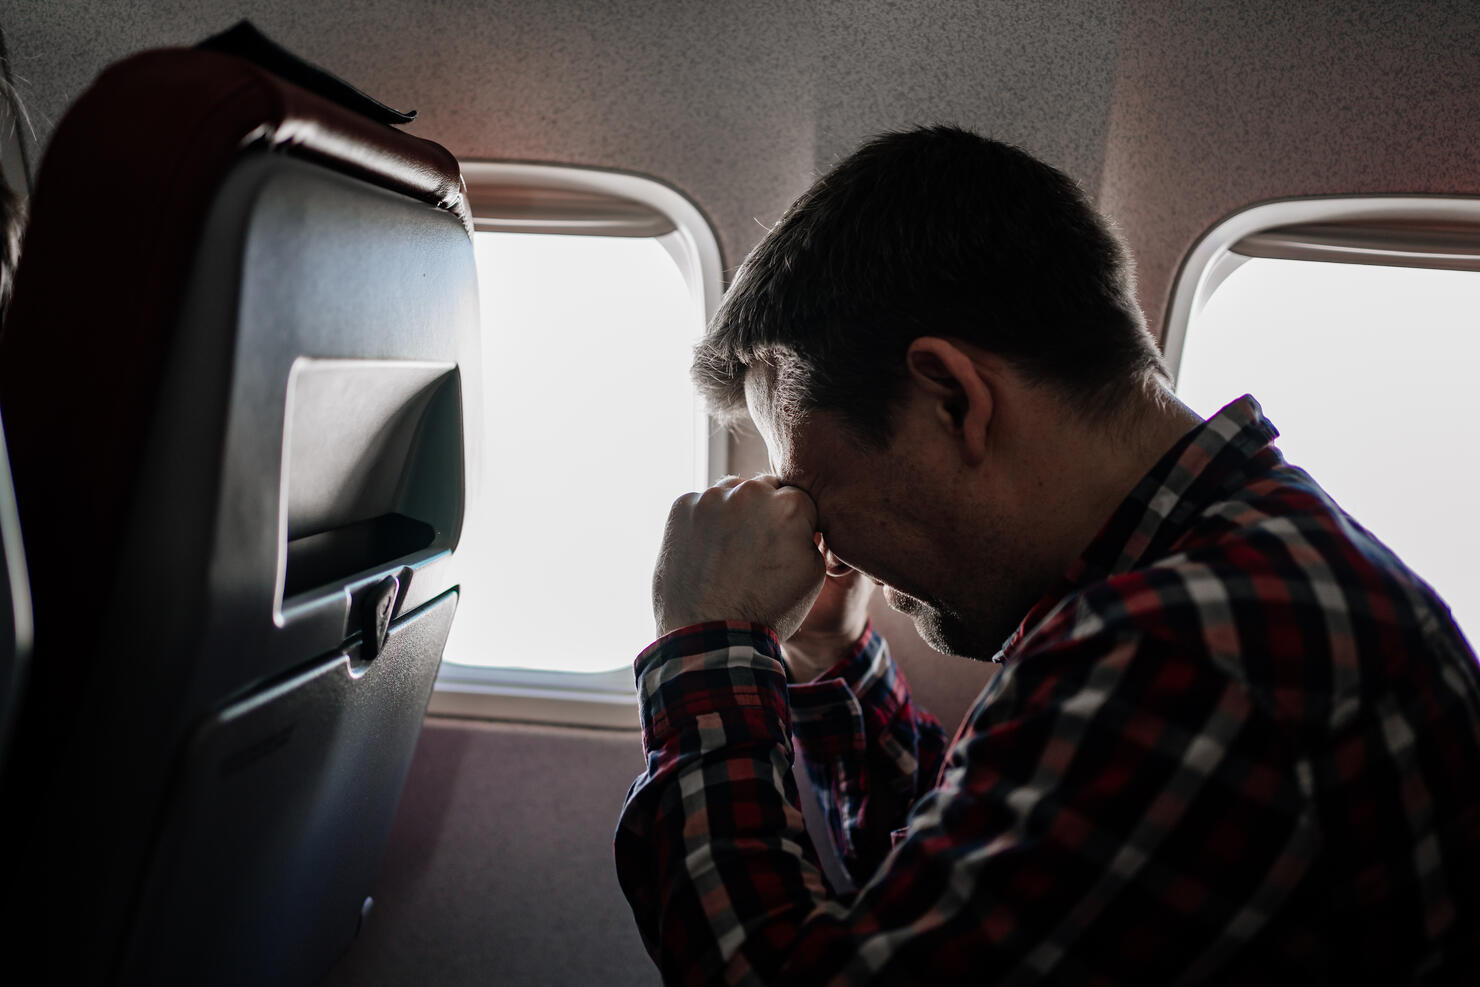 man in plaid shirt rubs eyes with his hands in seat of passenger on plane.